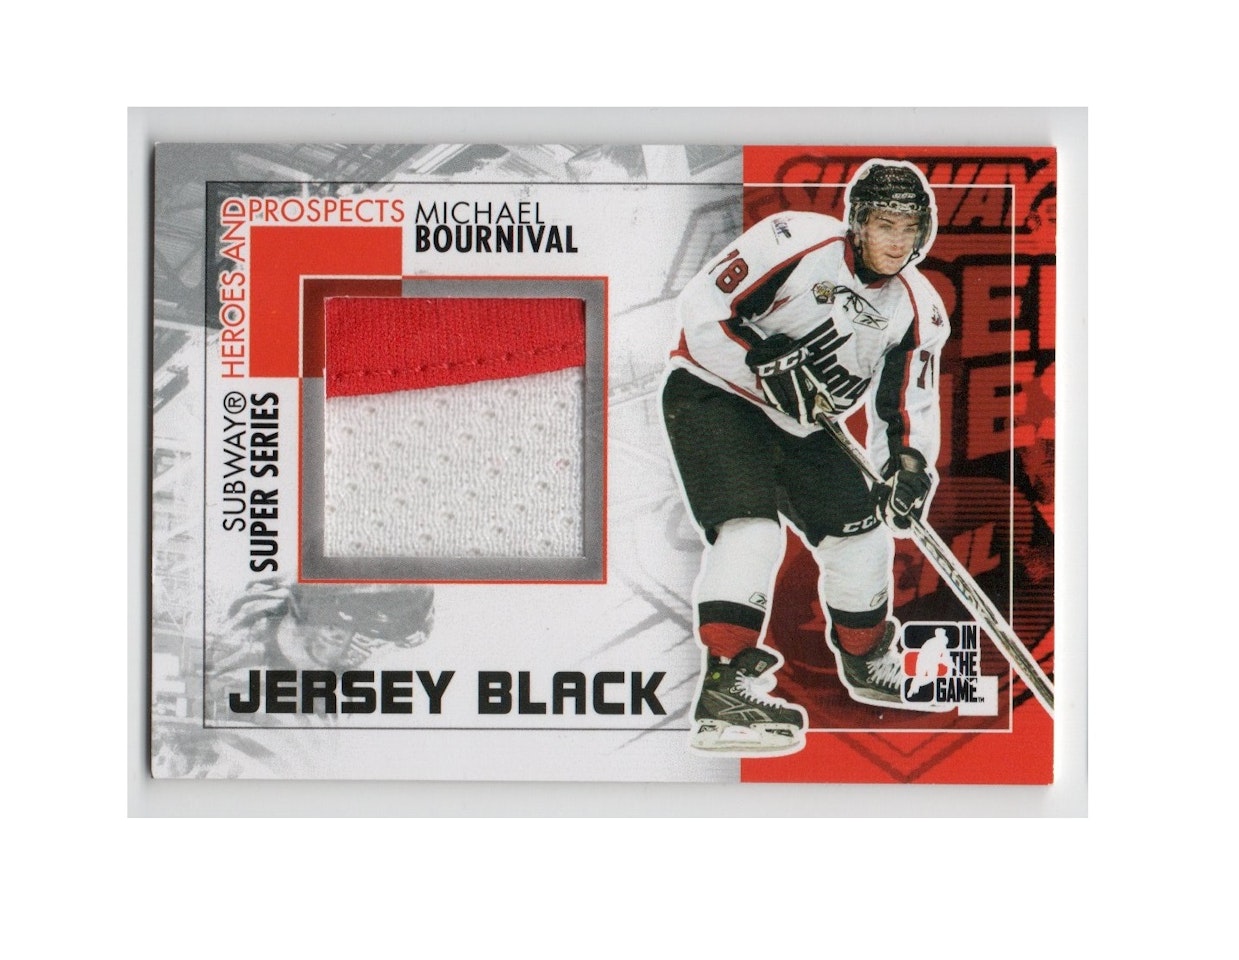 2010-11 ITG Heroes and Prospects Subway Series Jumbo Jerseys Black #SSM17 Michael Bournival (40-X148-OTHERS)